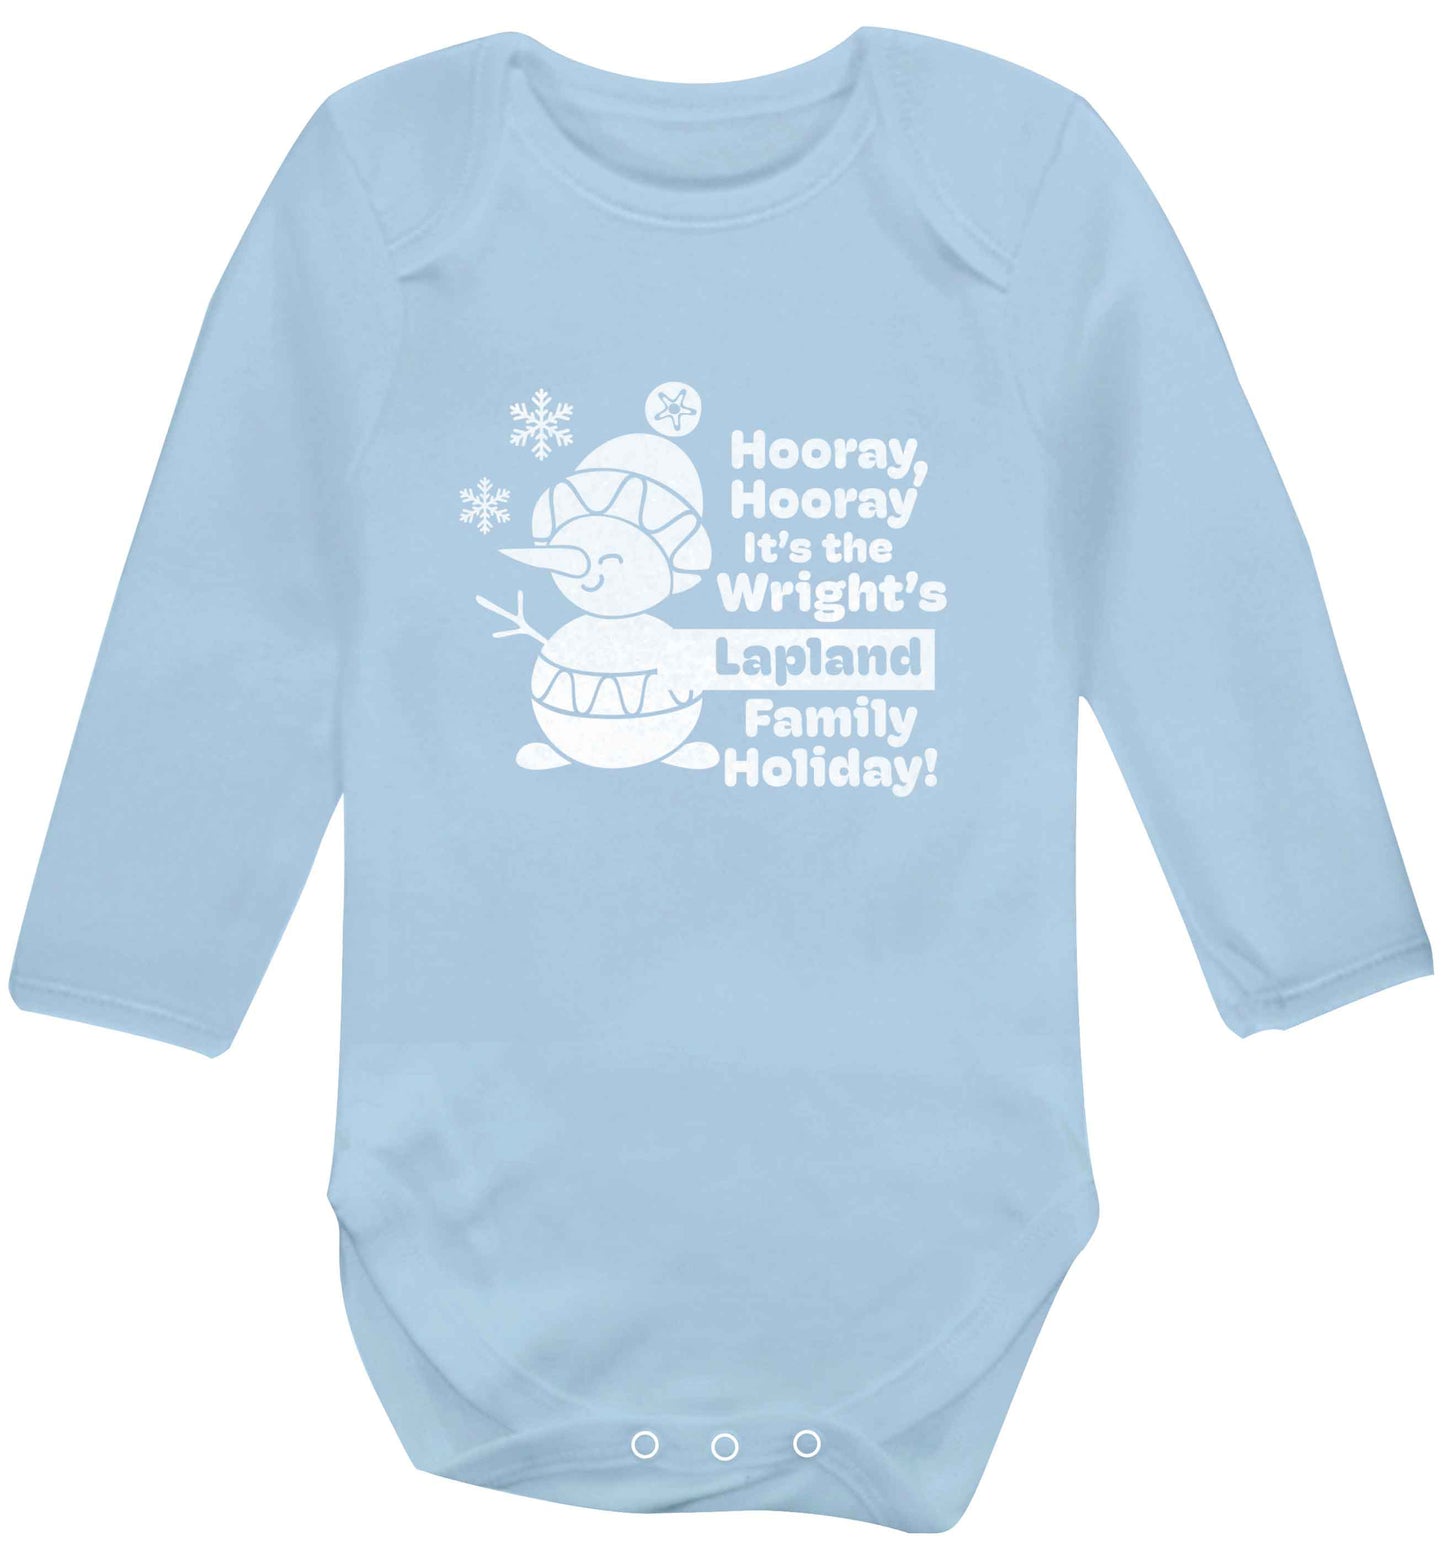 Hooray it's the personalised Lapland holiday! baby vest long sleeved pale blue 6-12 months